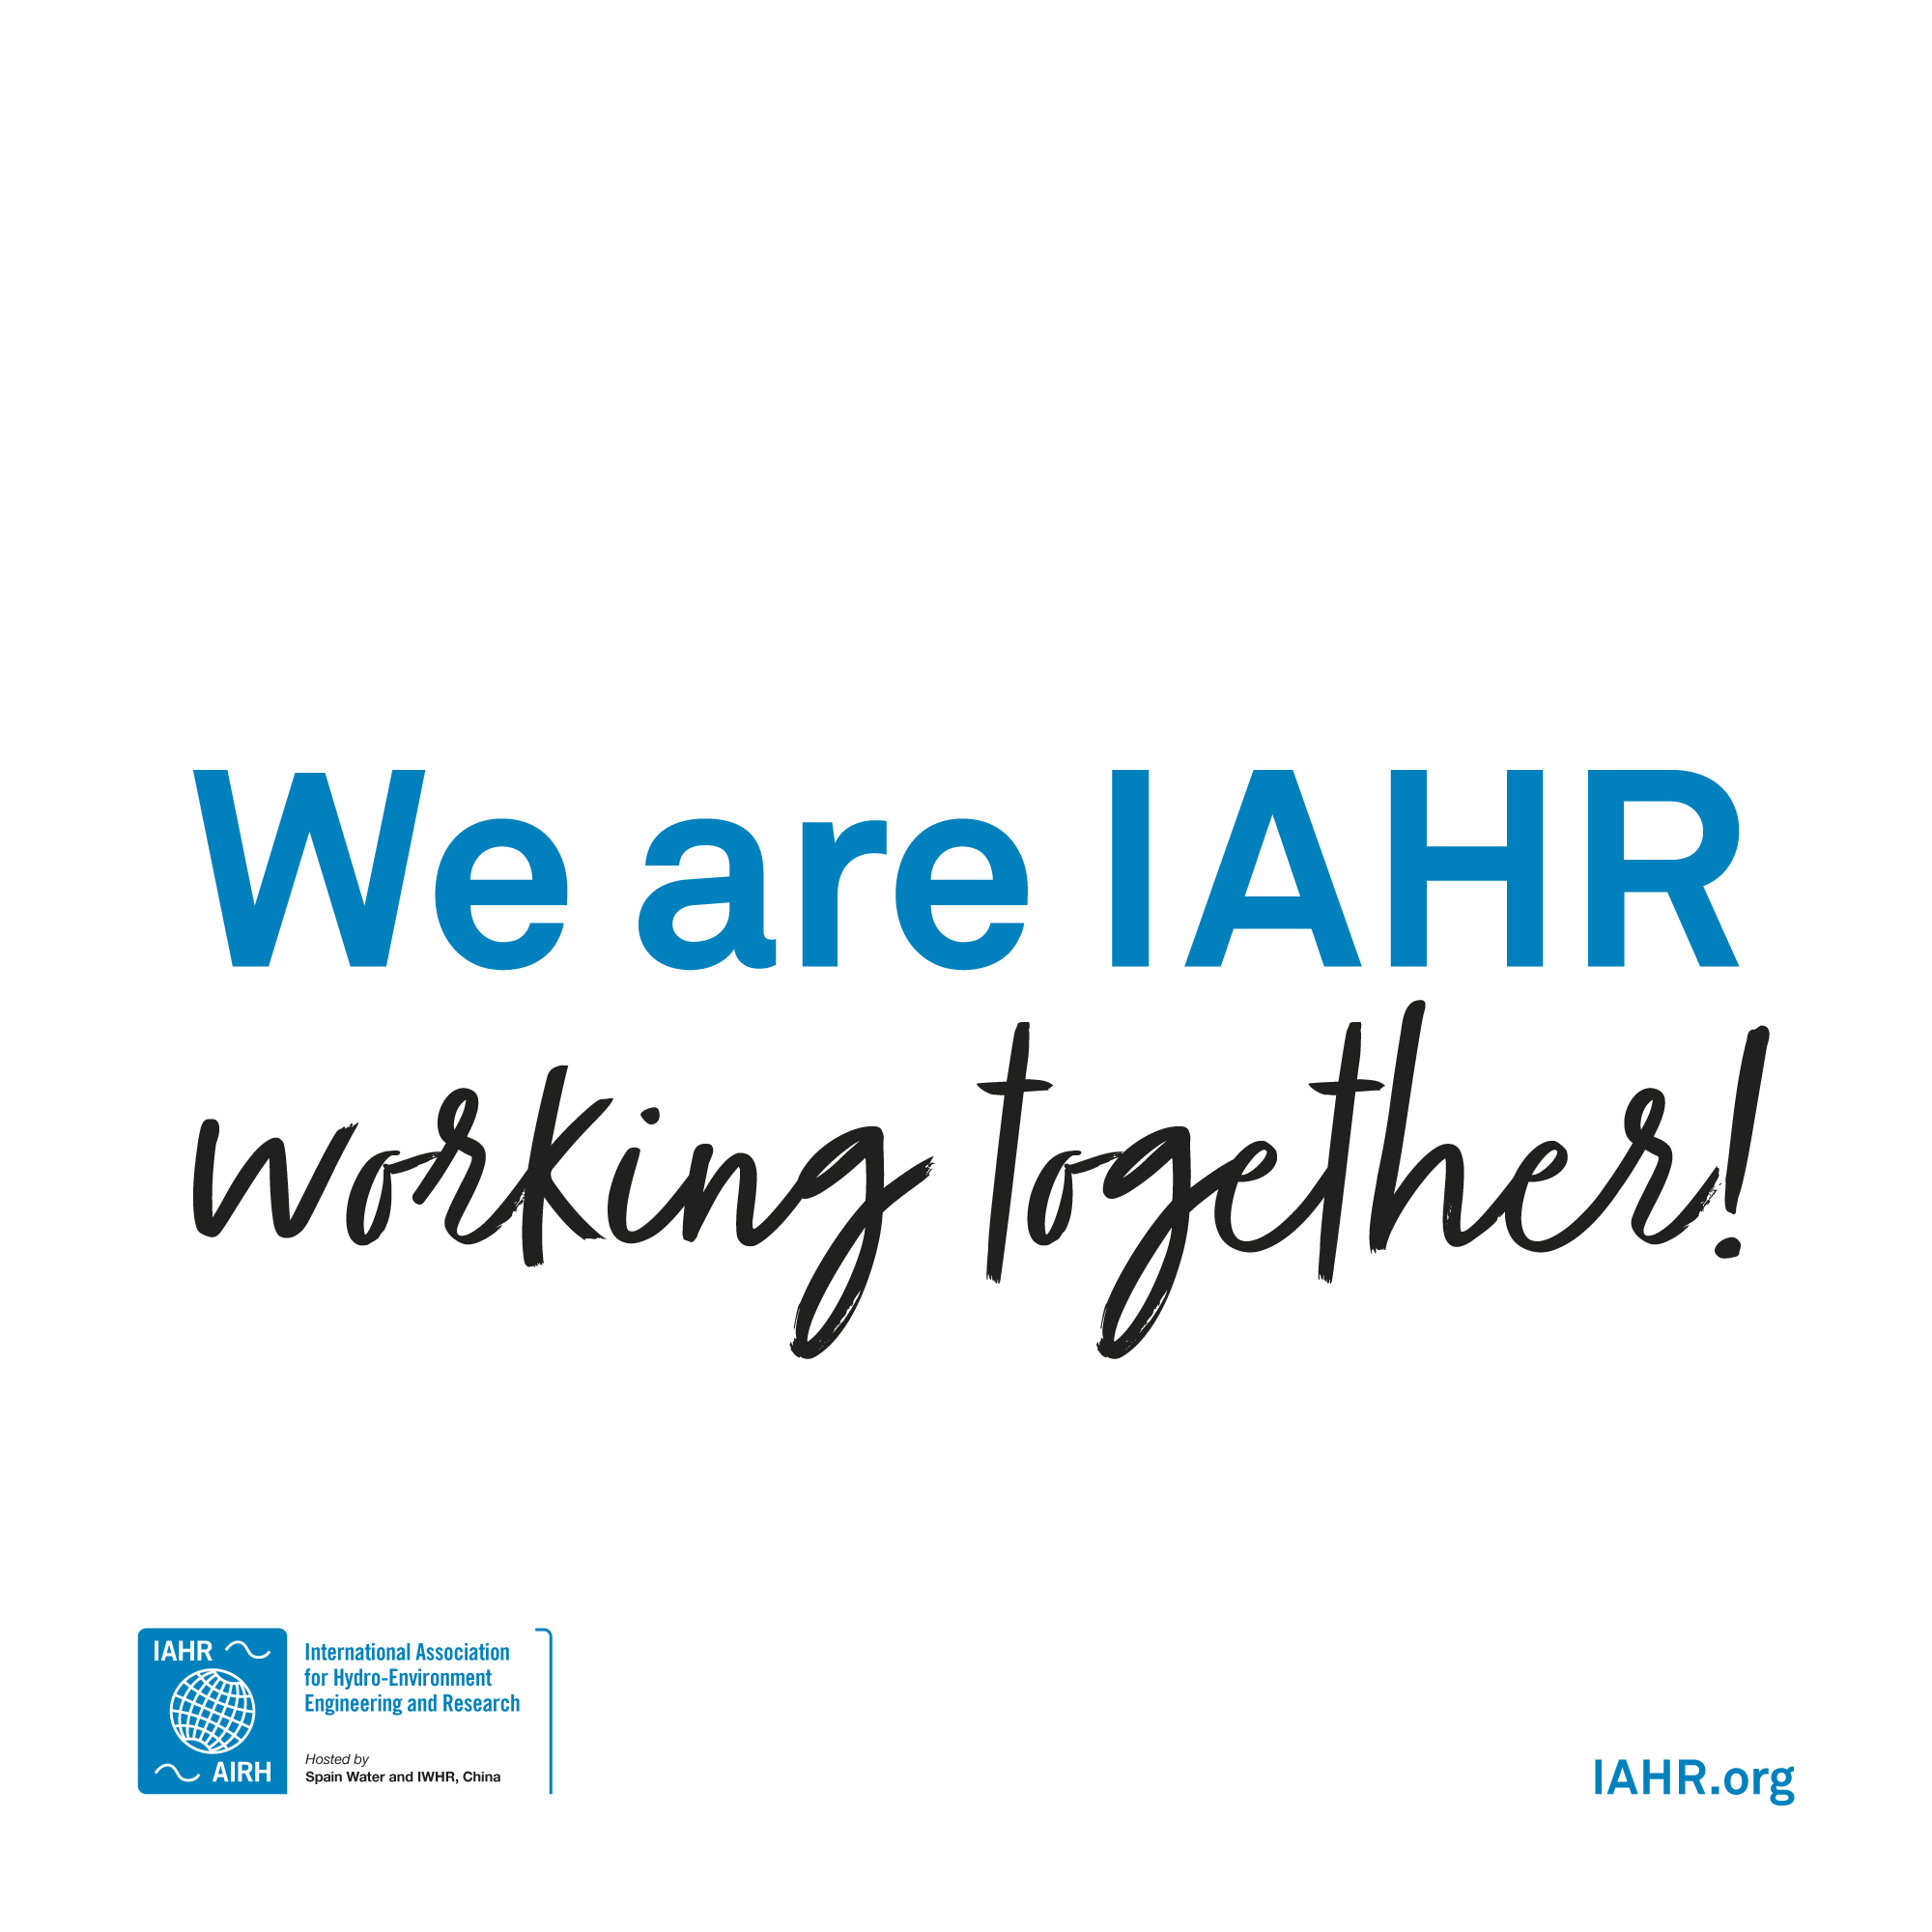 Download: We are IAHR working together! Graphic